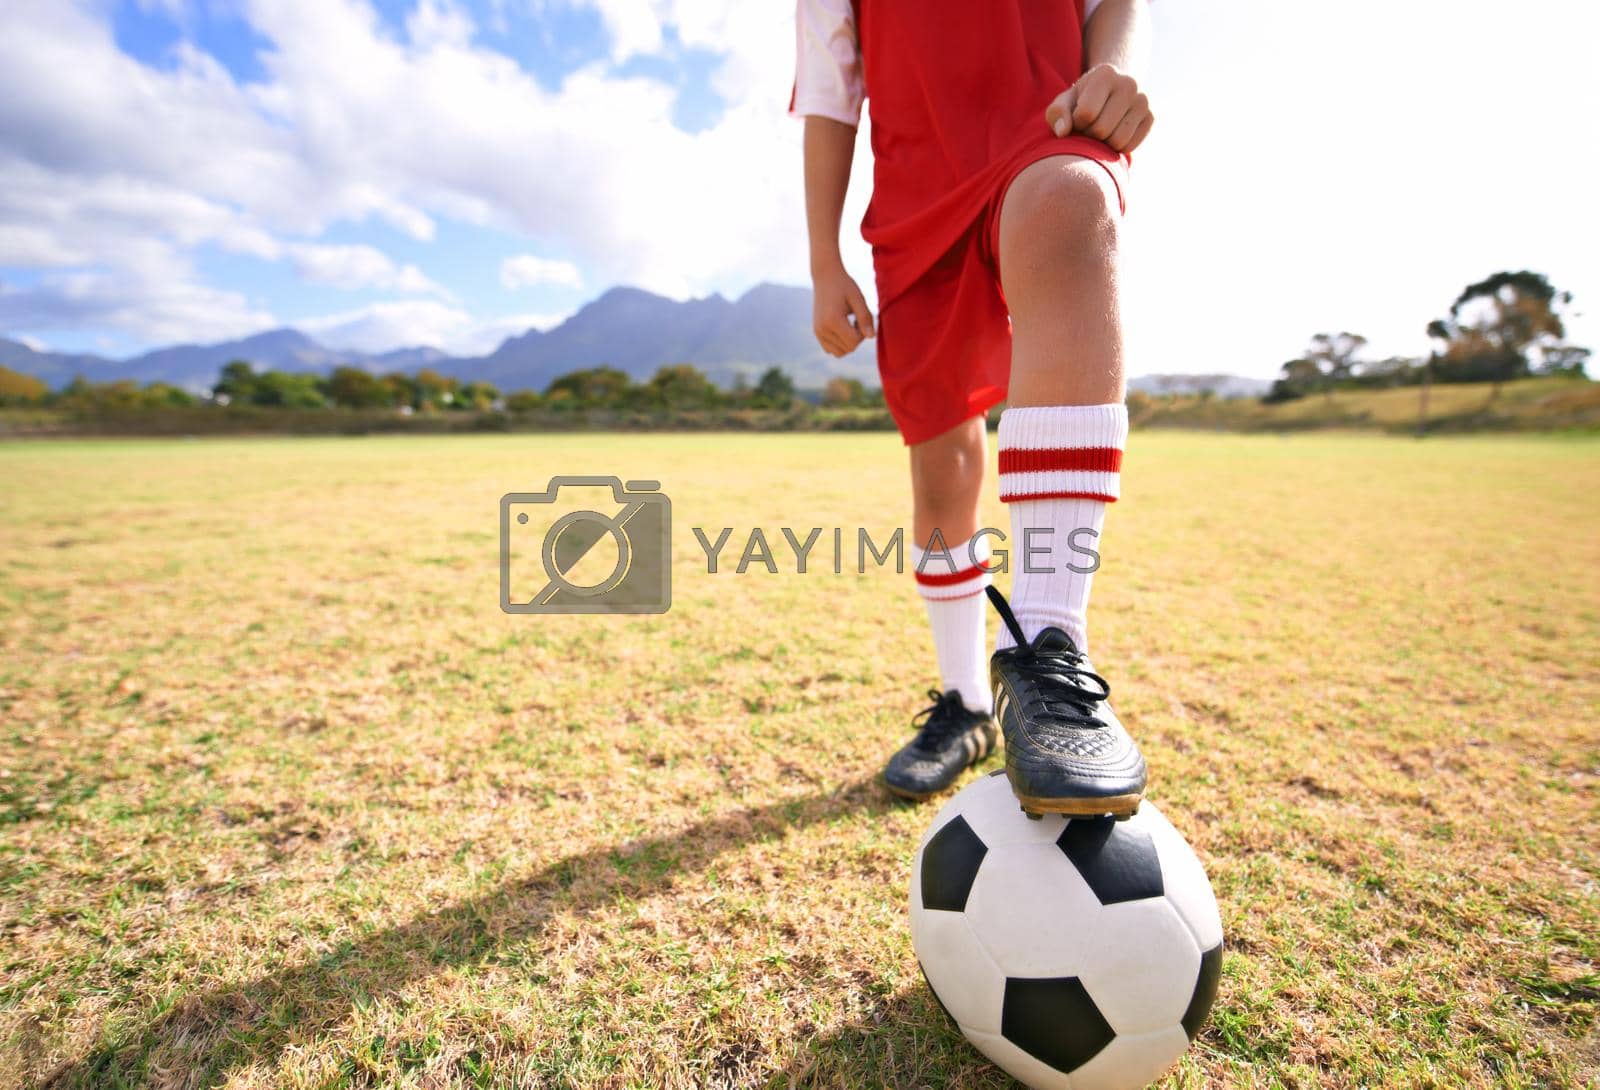 Royalty free image of Ready to kick-off. a young boys foot on a soccer ball. by YuriArcurs